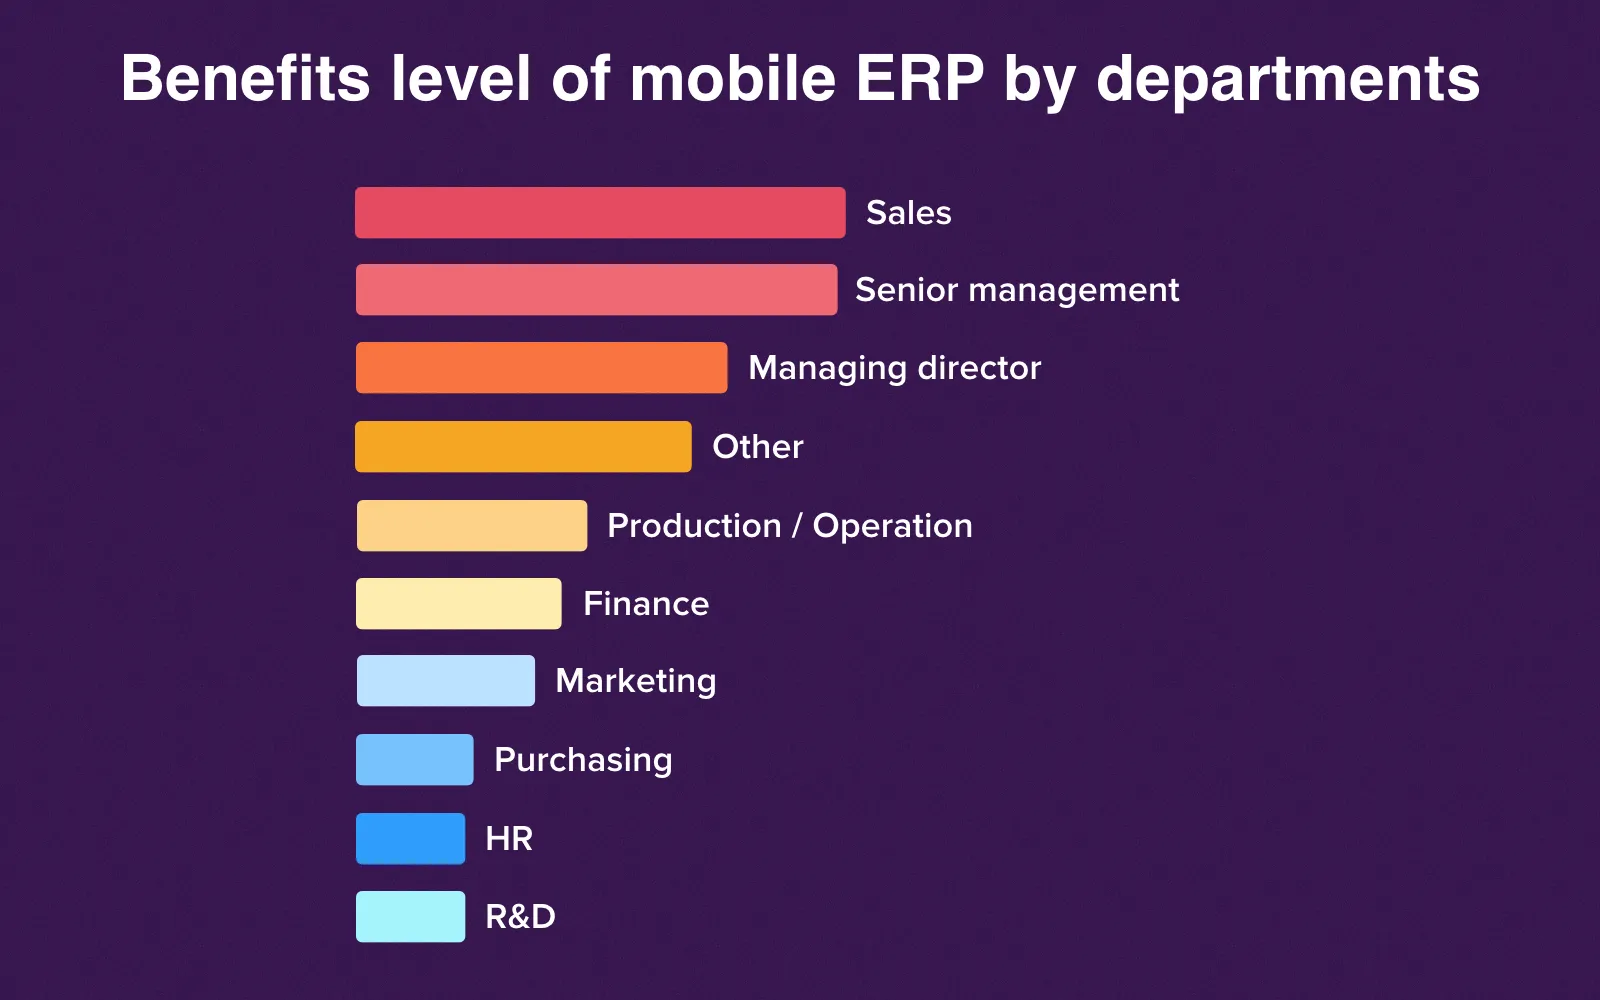 Departments that benefit most of all from mobile ERP solutions